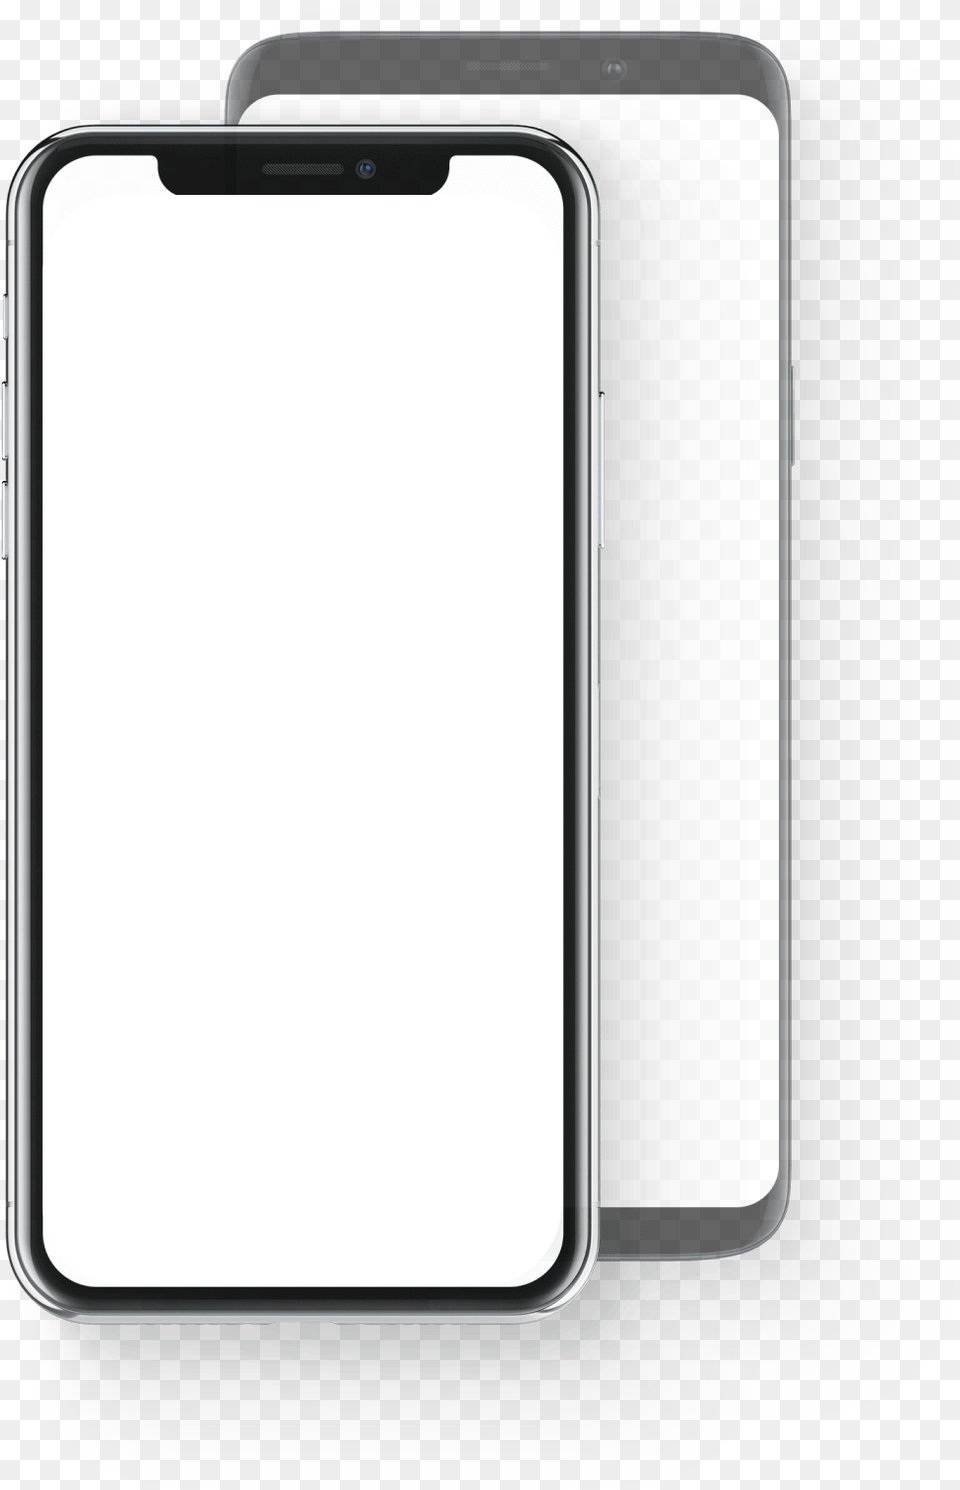 Ionic Crossplatform Mobile App Development Mobile Phone Case, Electronics, Mobile Phone, White Board Free Png